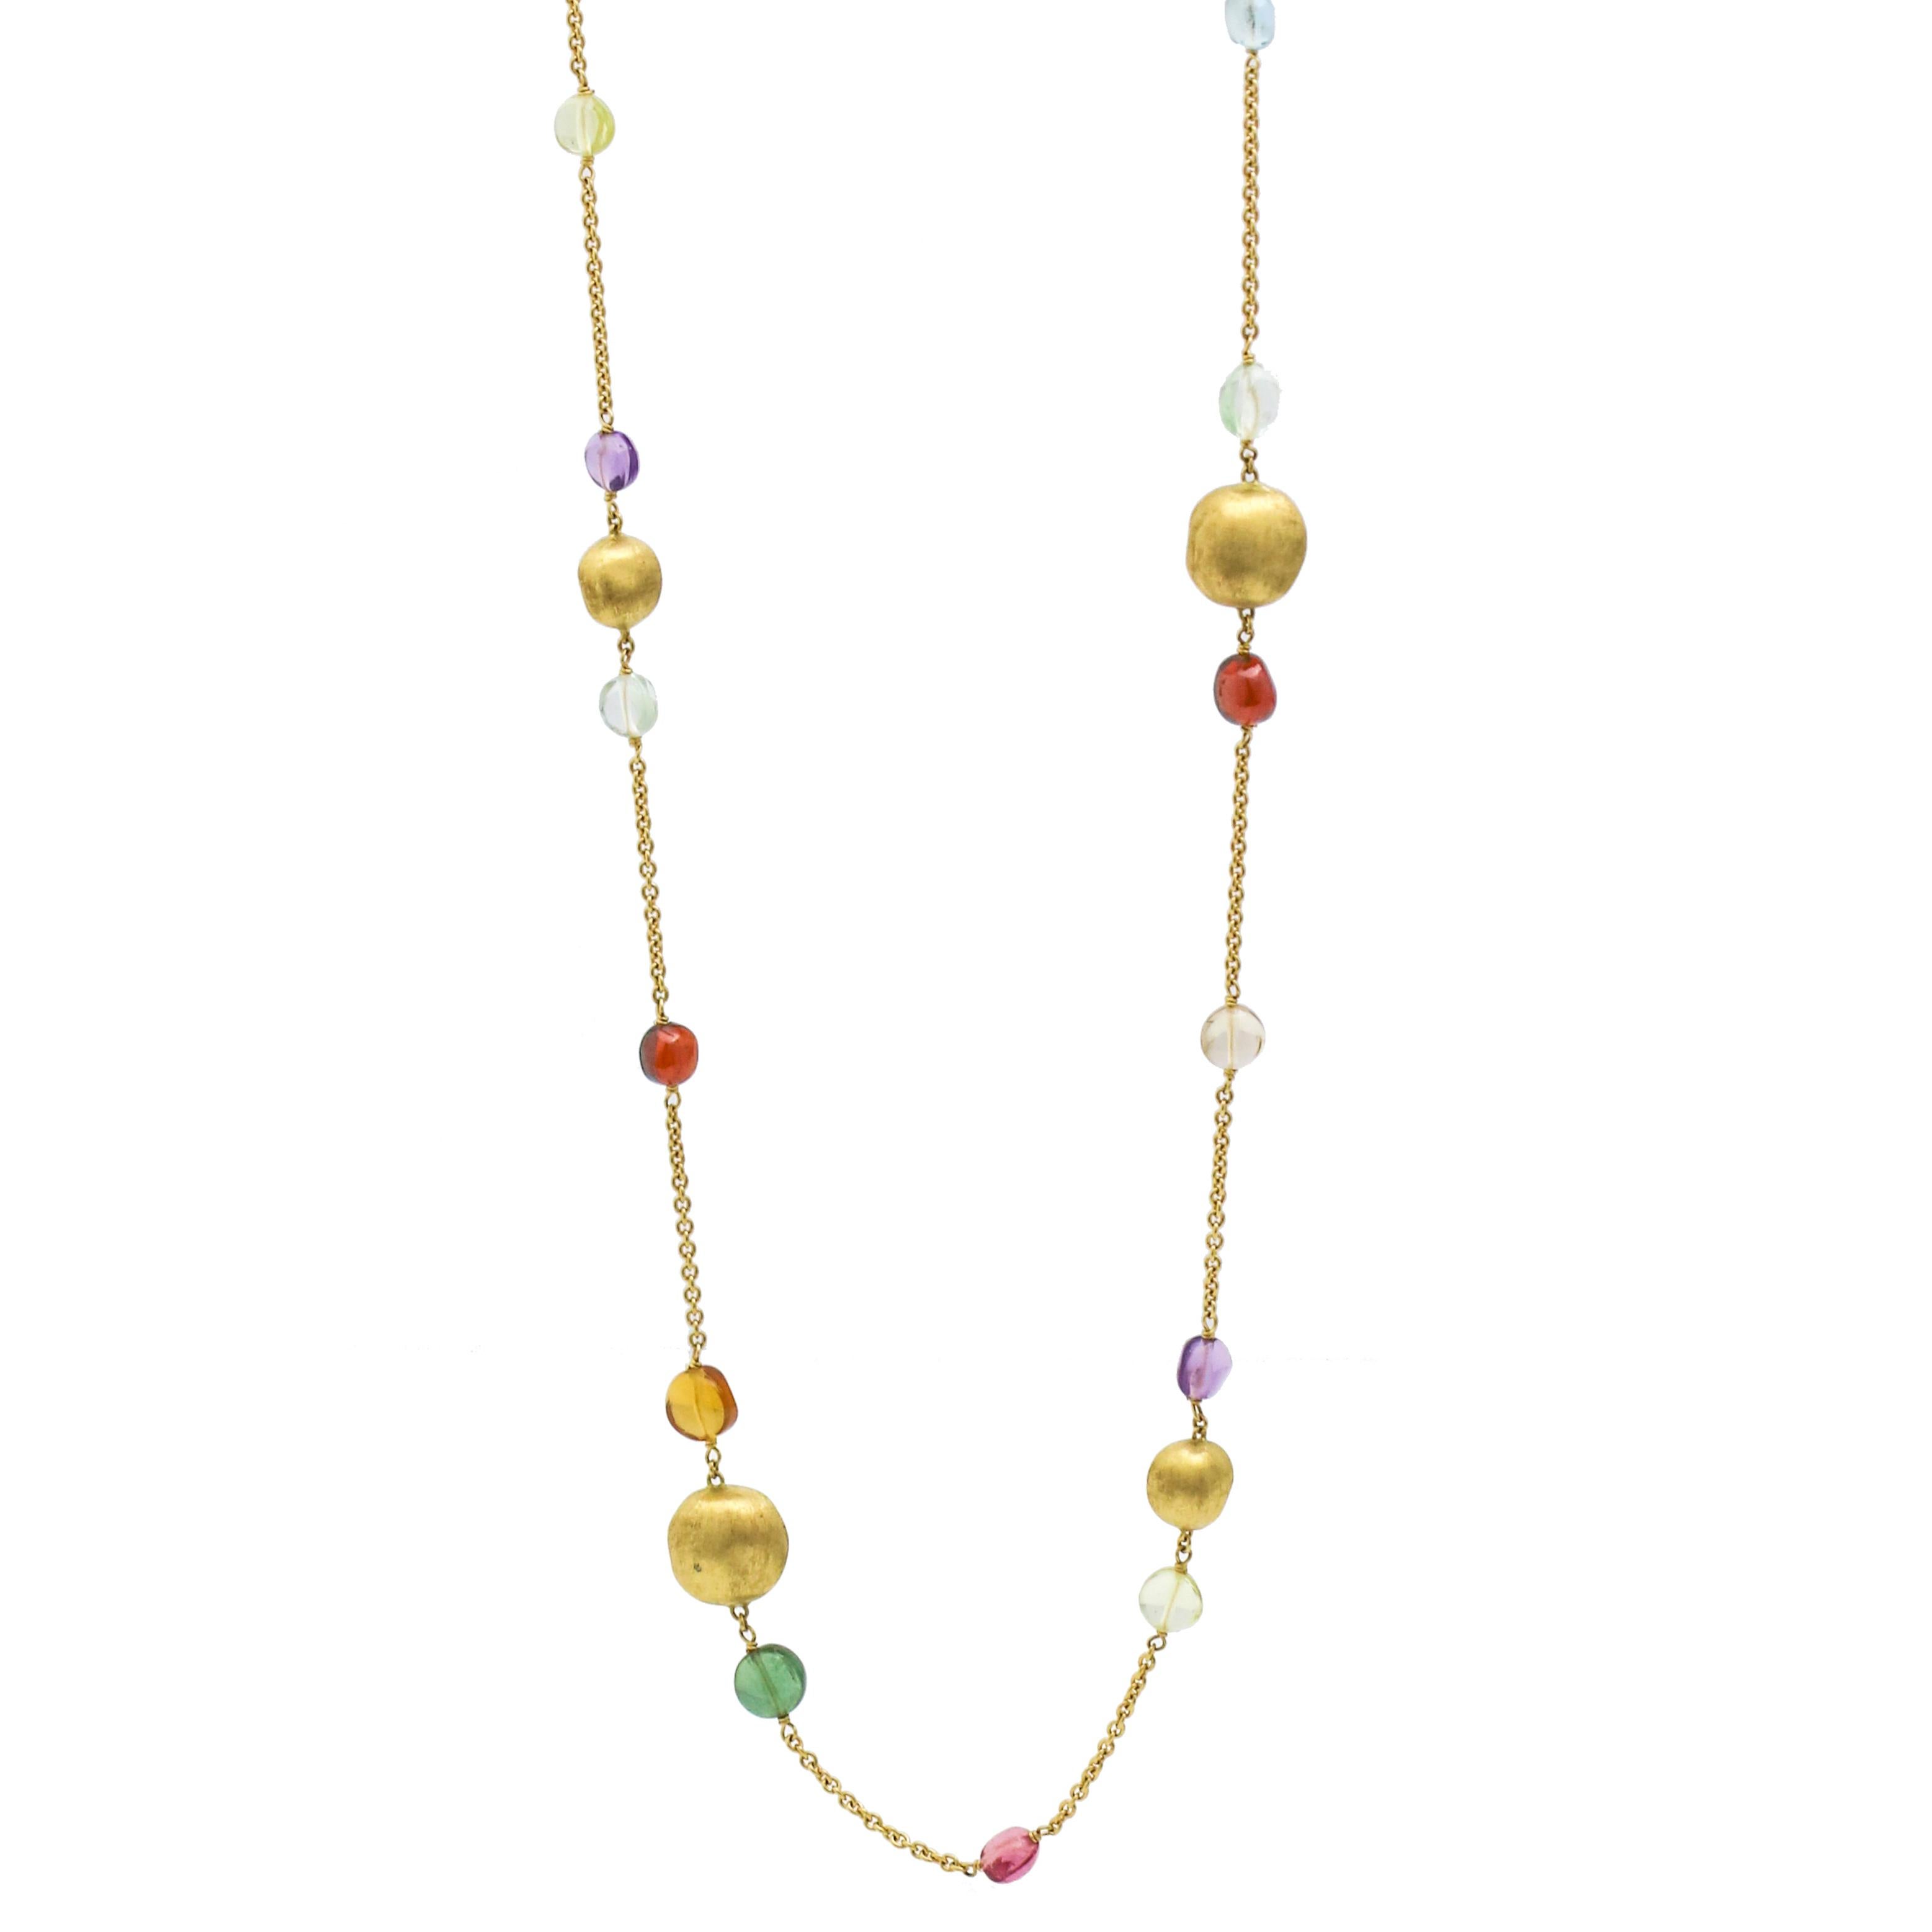 Modern Marco Bicego 18K Yellow Gold and Multi-Colored Gemstone Long Statement Necklace